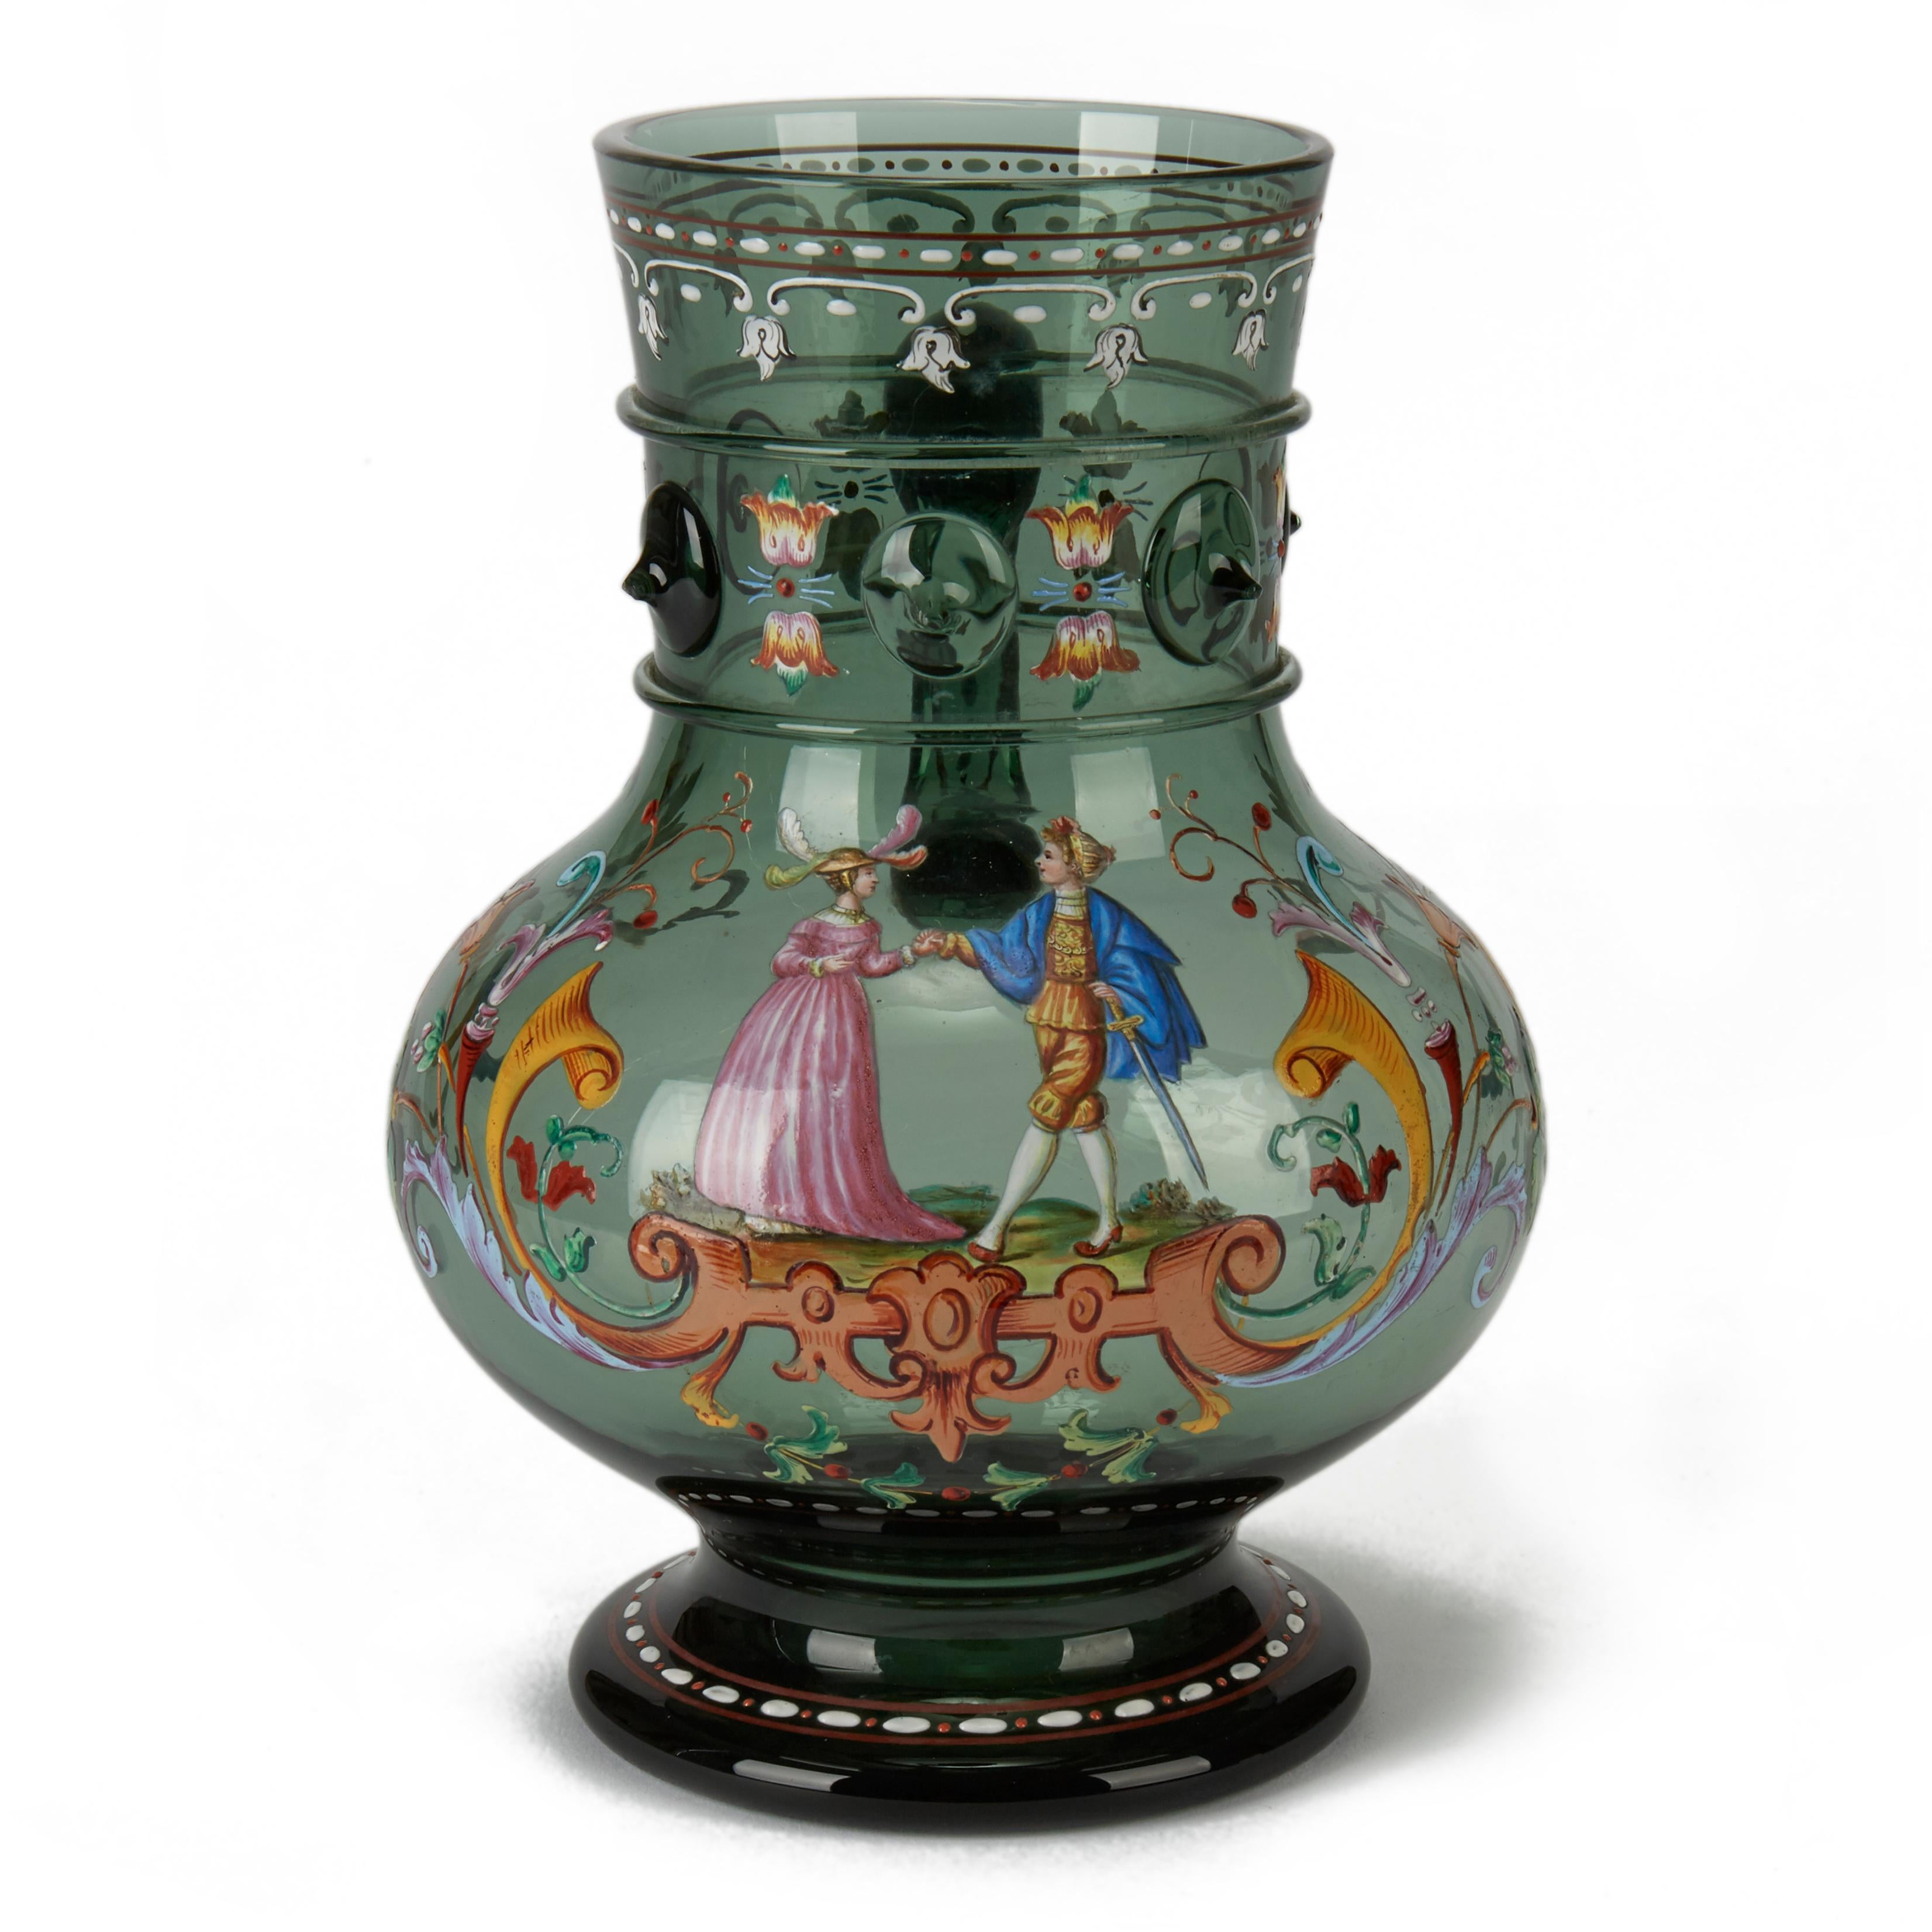 An exceptional antique bohemian green glass beer stein, attributed to Moser with a courting couple set amidst scroll and floral designs with finely applied detail and bright and colorful enameling. The stein has prunts and collars applied around the